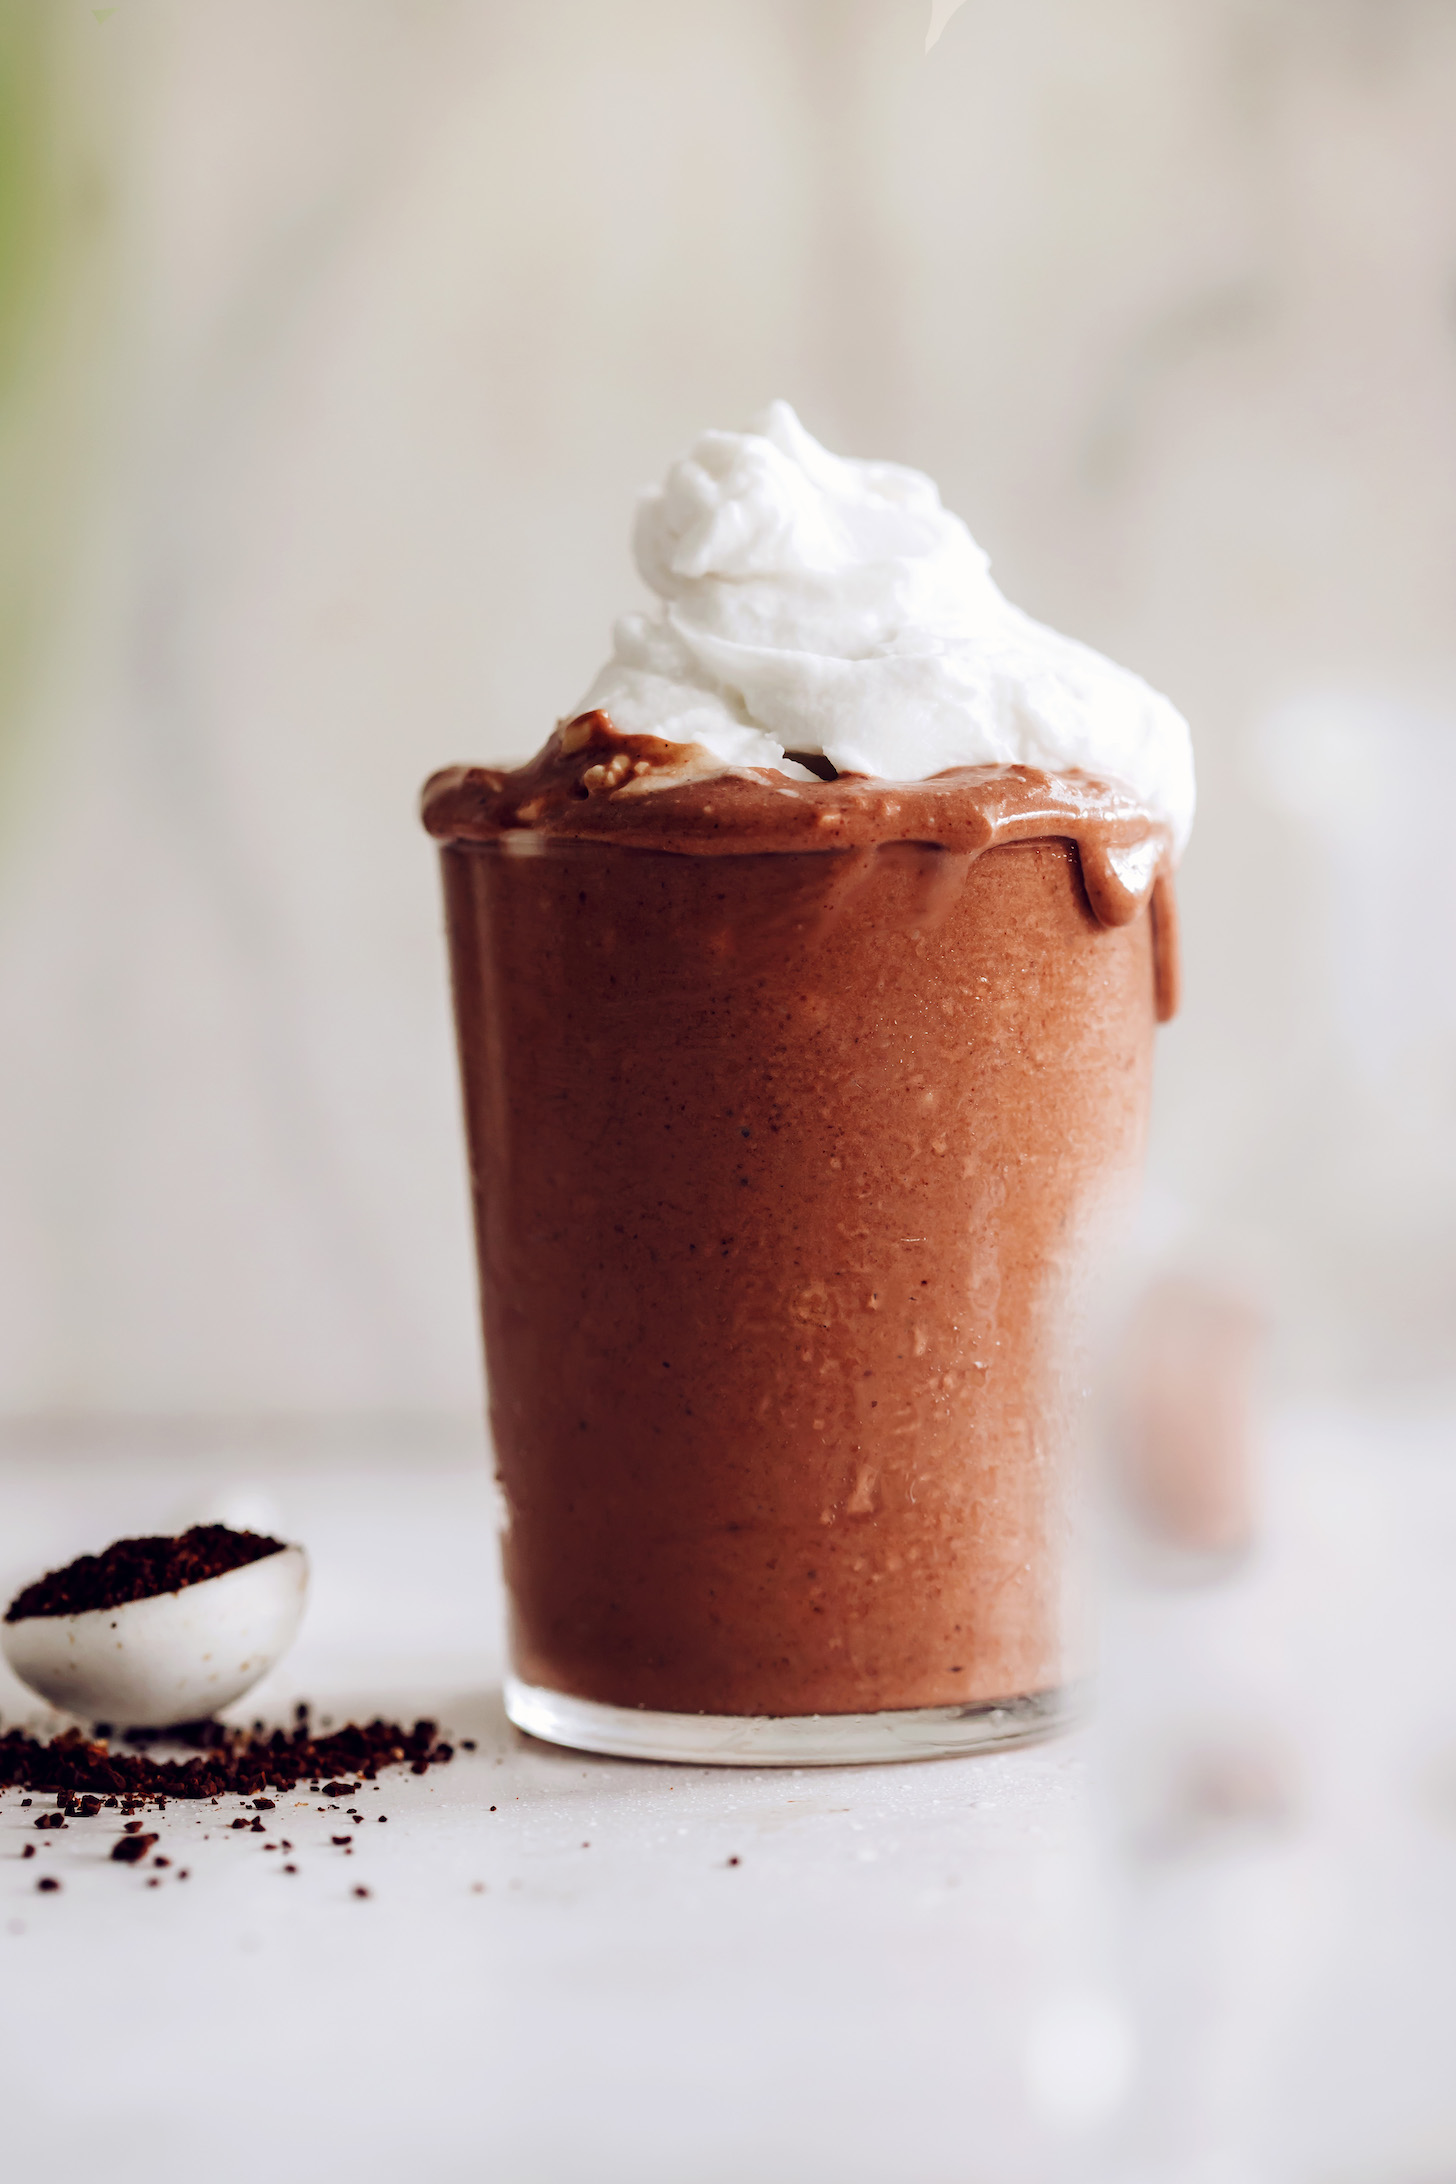 Overflowing glass of our healthier jamocha shake recipe topped with coconut whipped cream